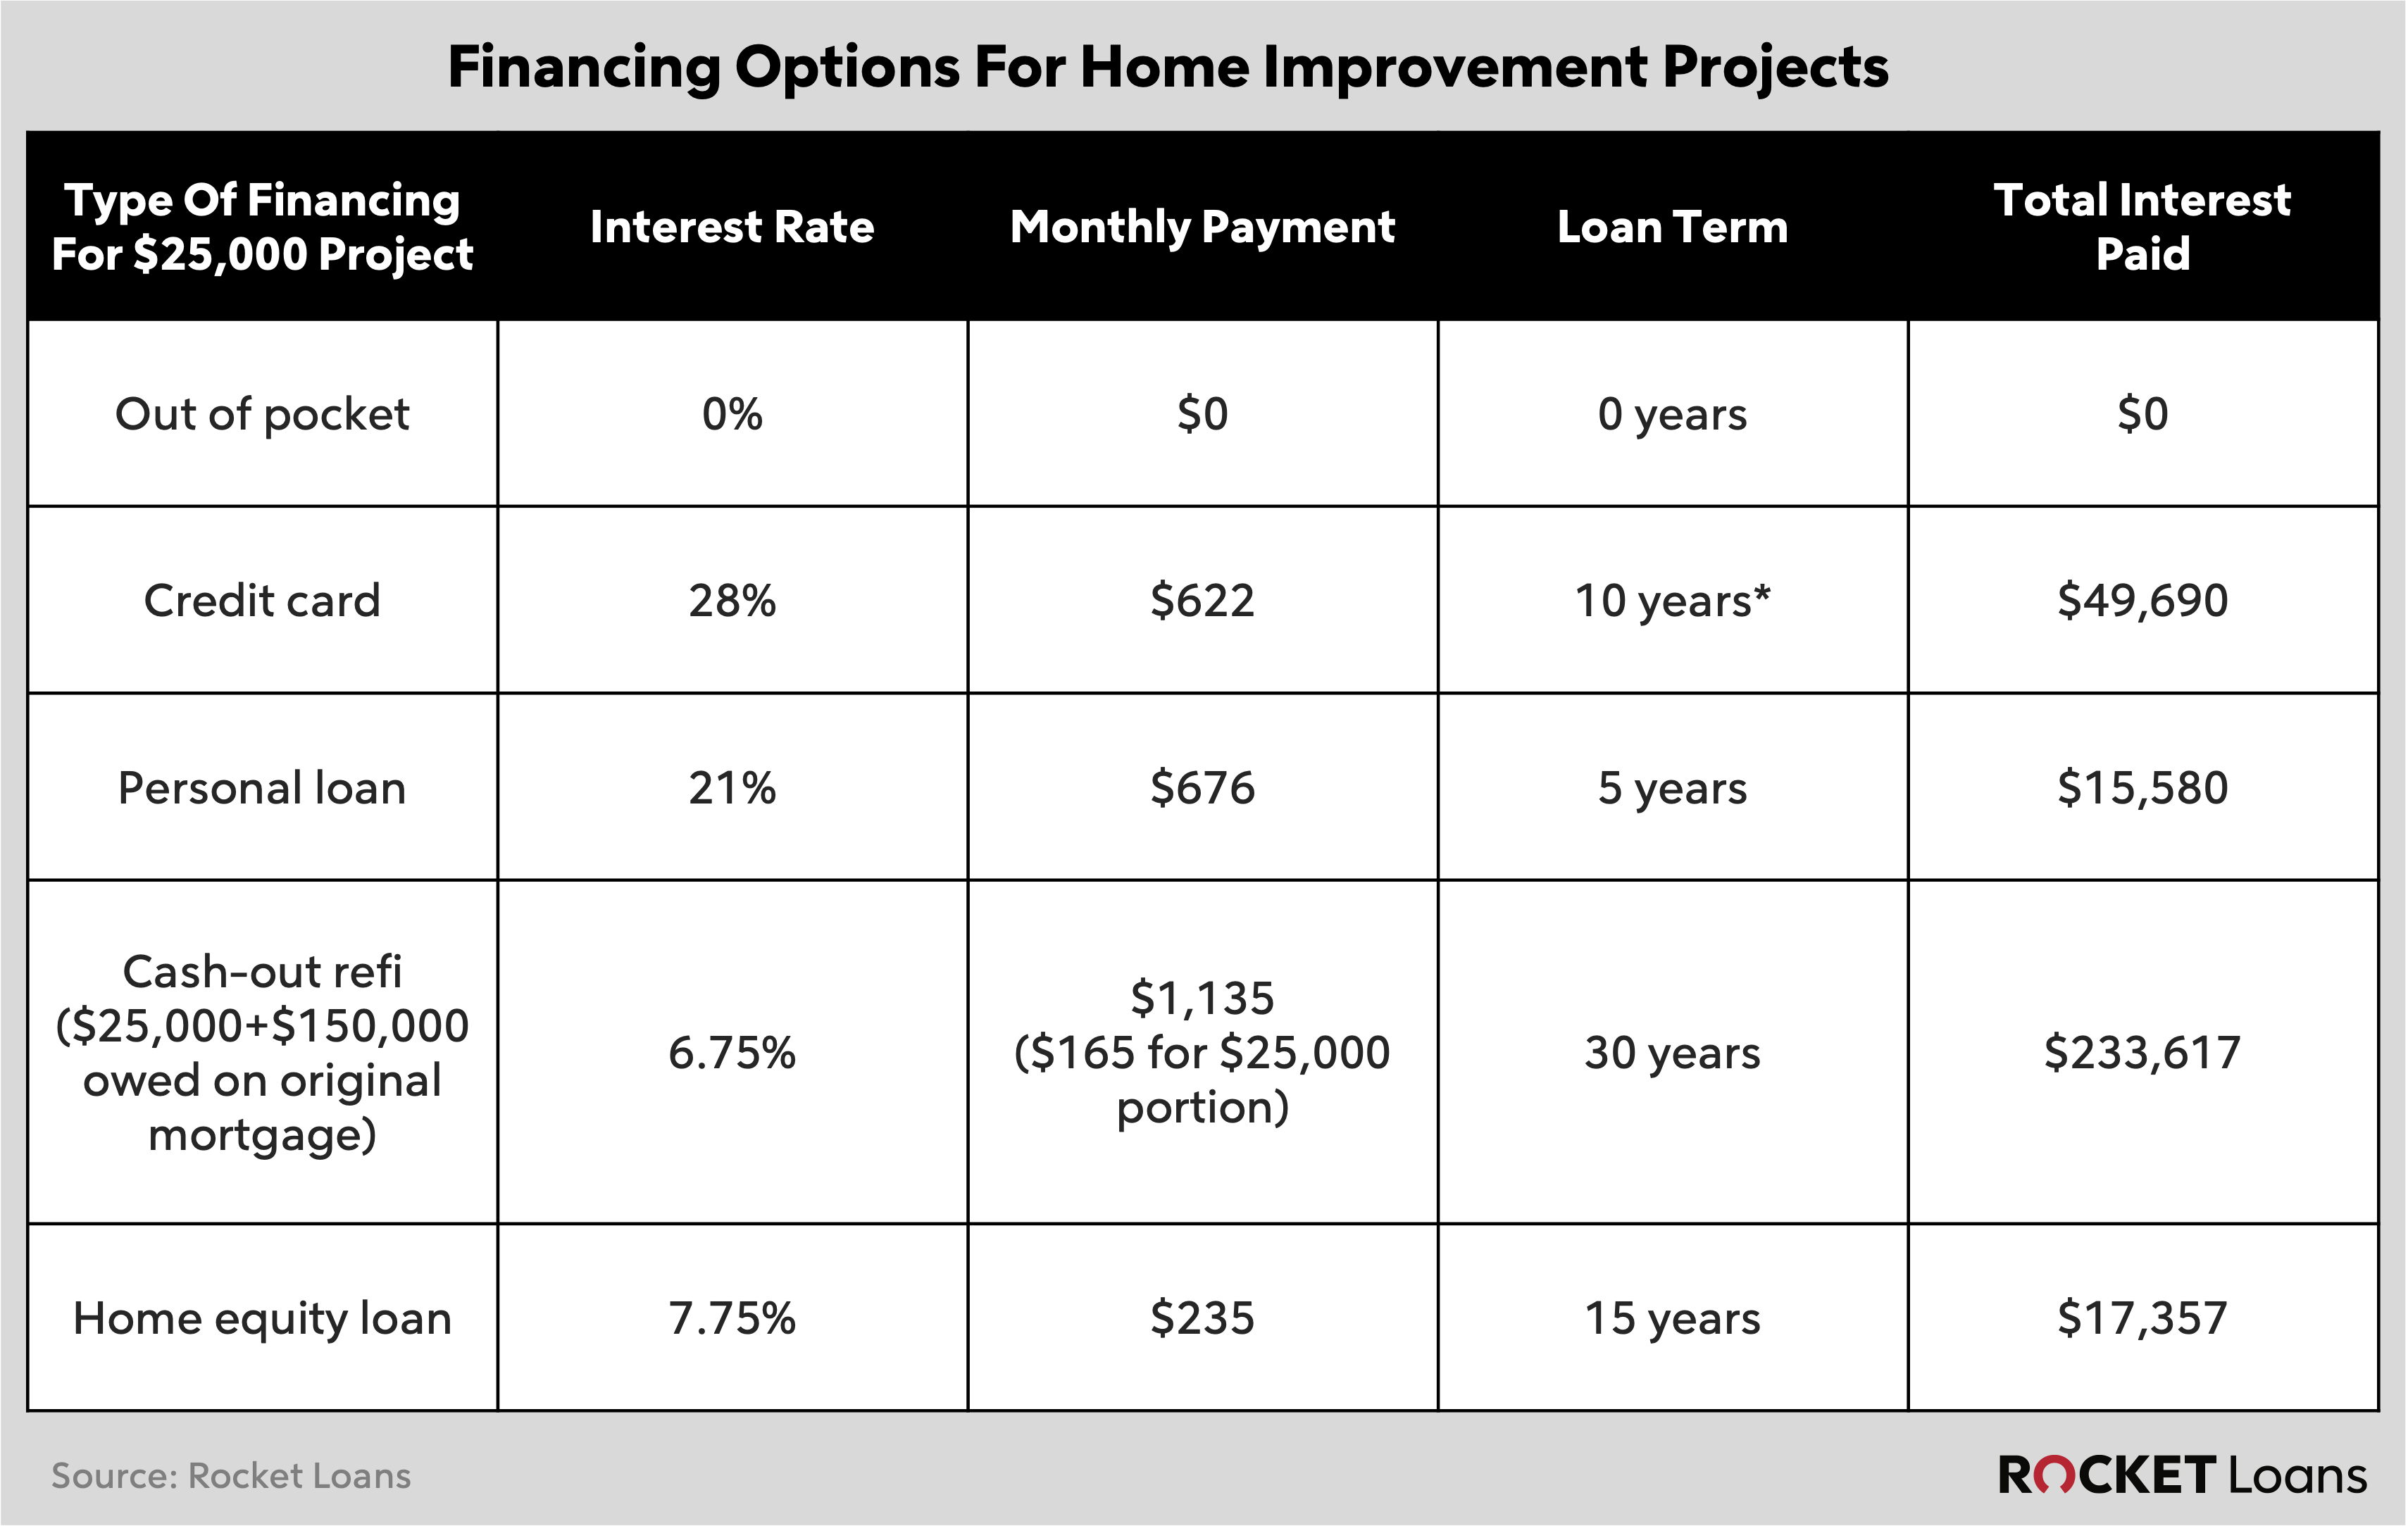 Table showing columns for Type of Financing For $25,000 Project / Interest Rate / Monthly Payment / Loan Term / Total Interest Paid.